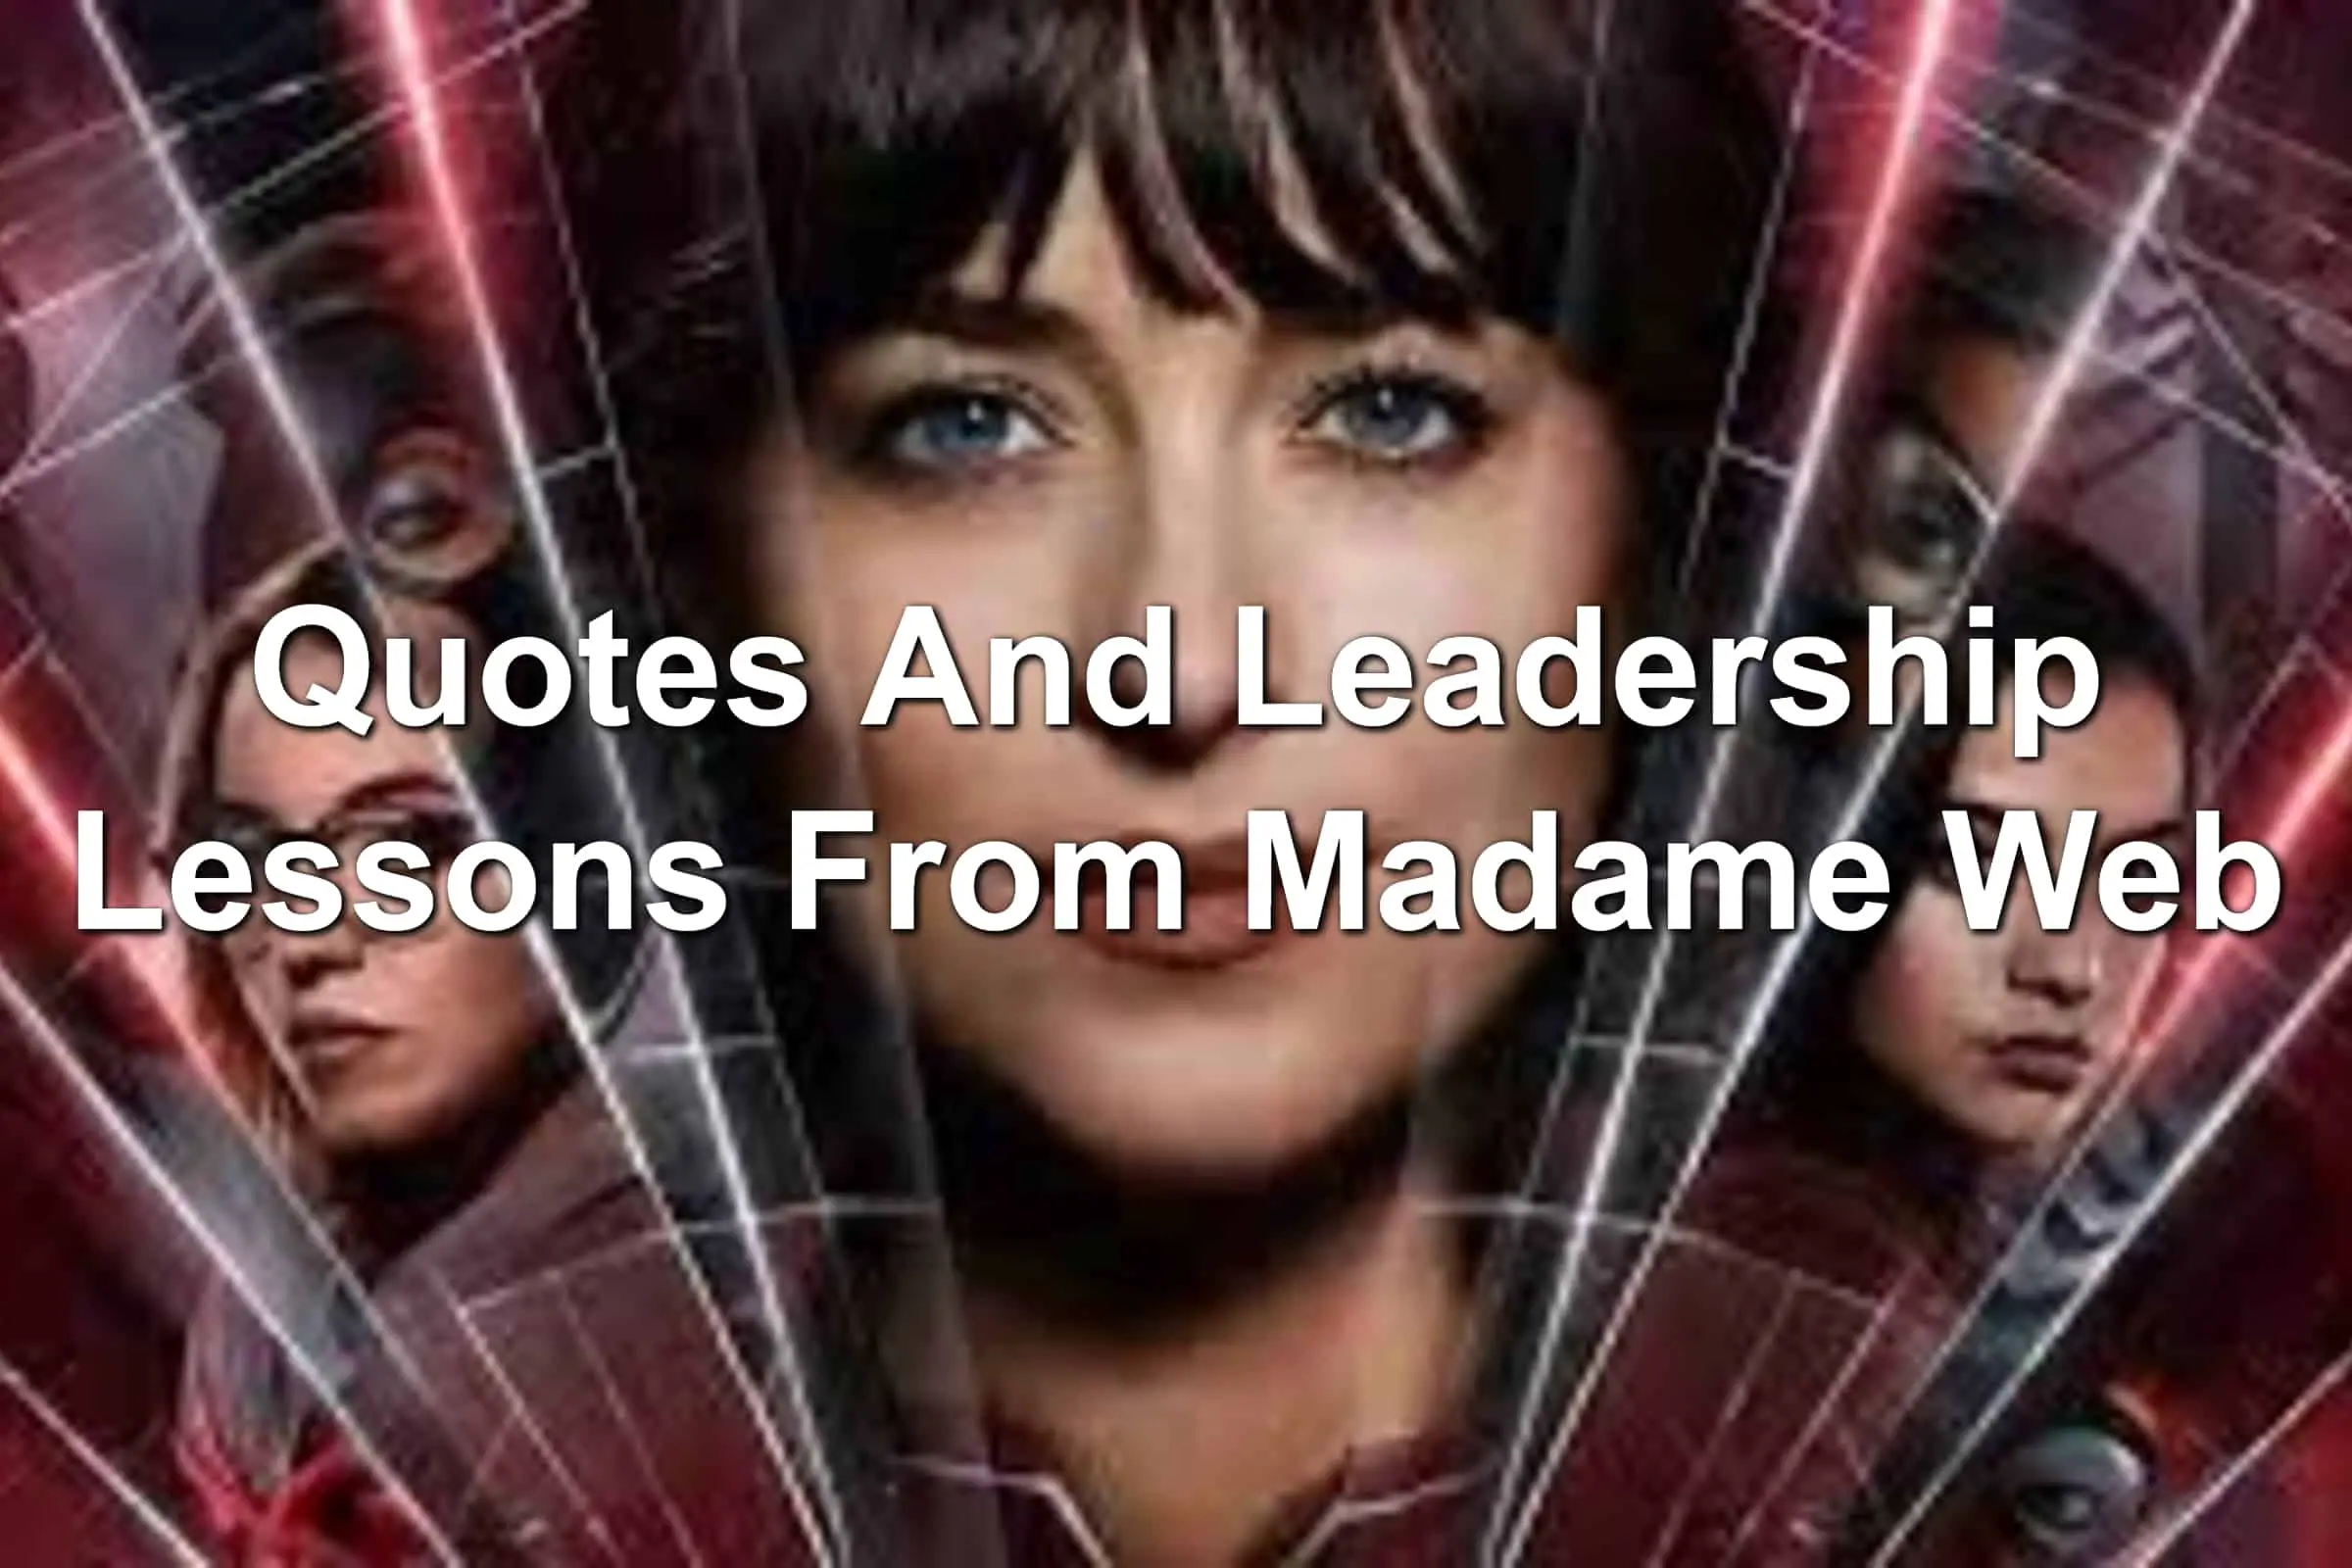 Red background, webbing spinning out with multiple characters from Madame Web movie featured in image